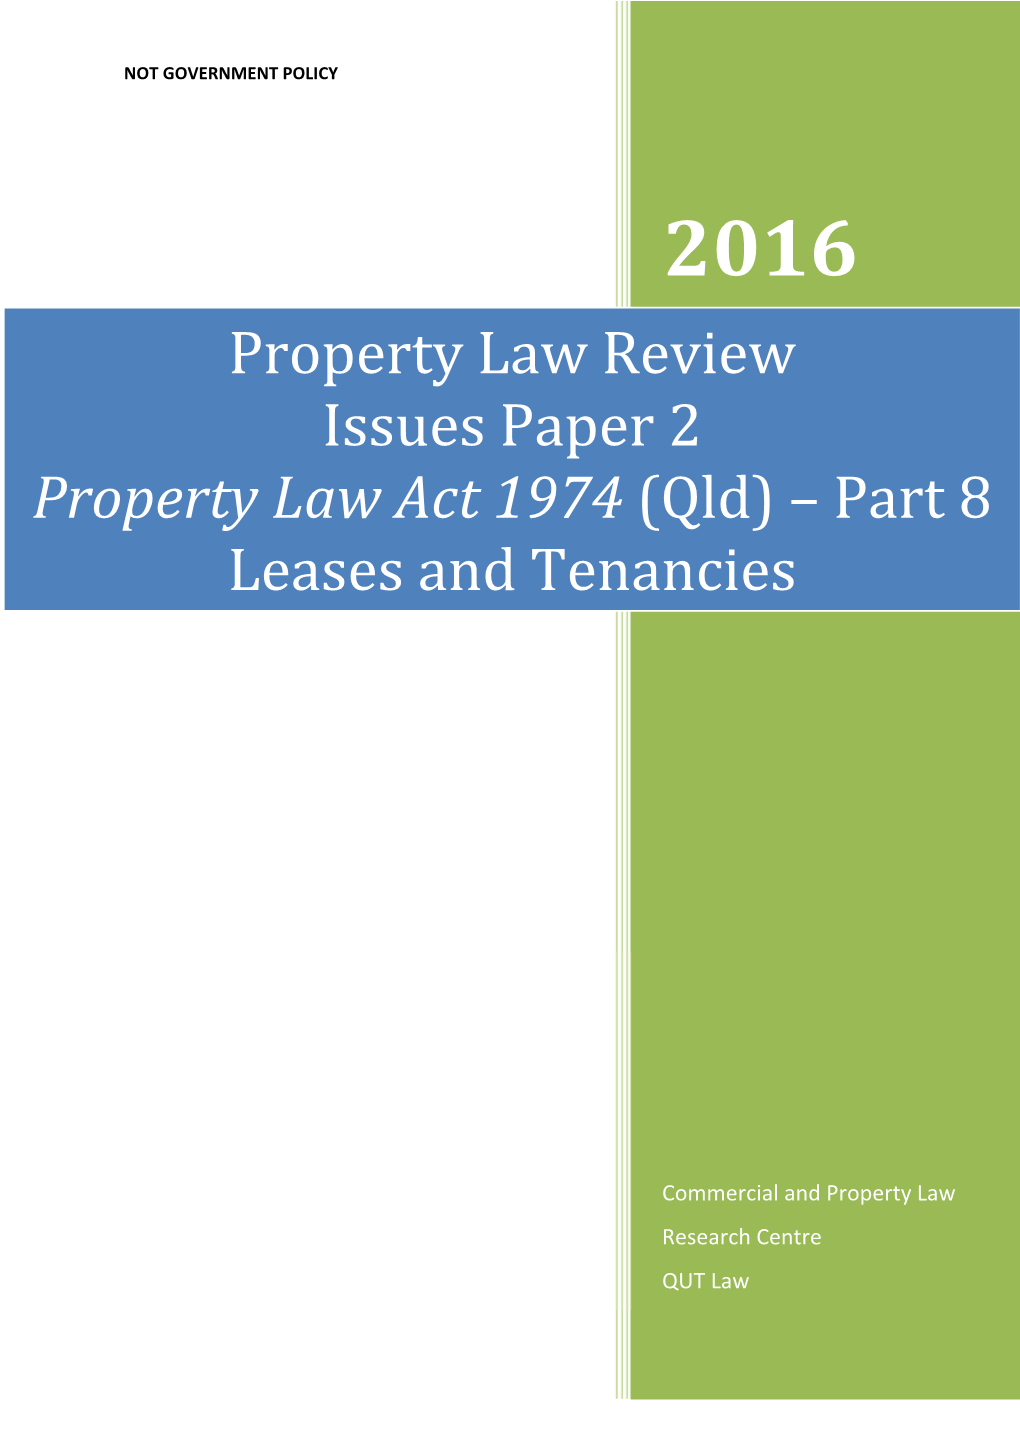 Issues Paper 2: Property Law Act 1974 (Qld) – Part 8 Leases and Tenancies